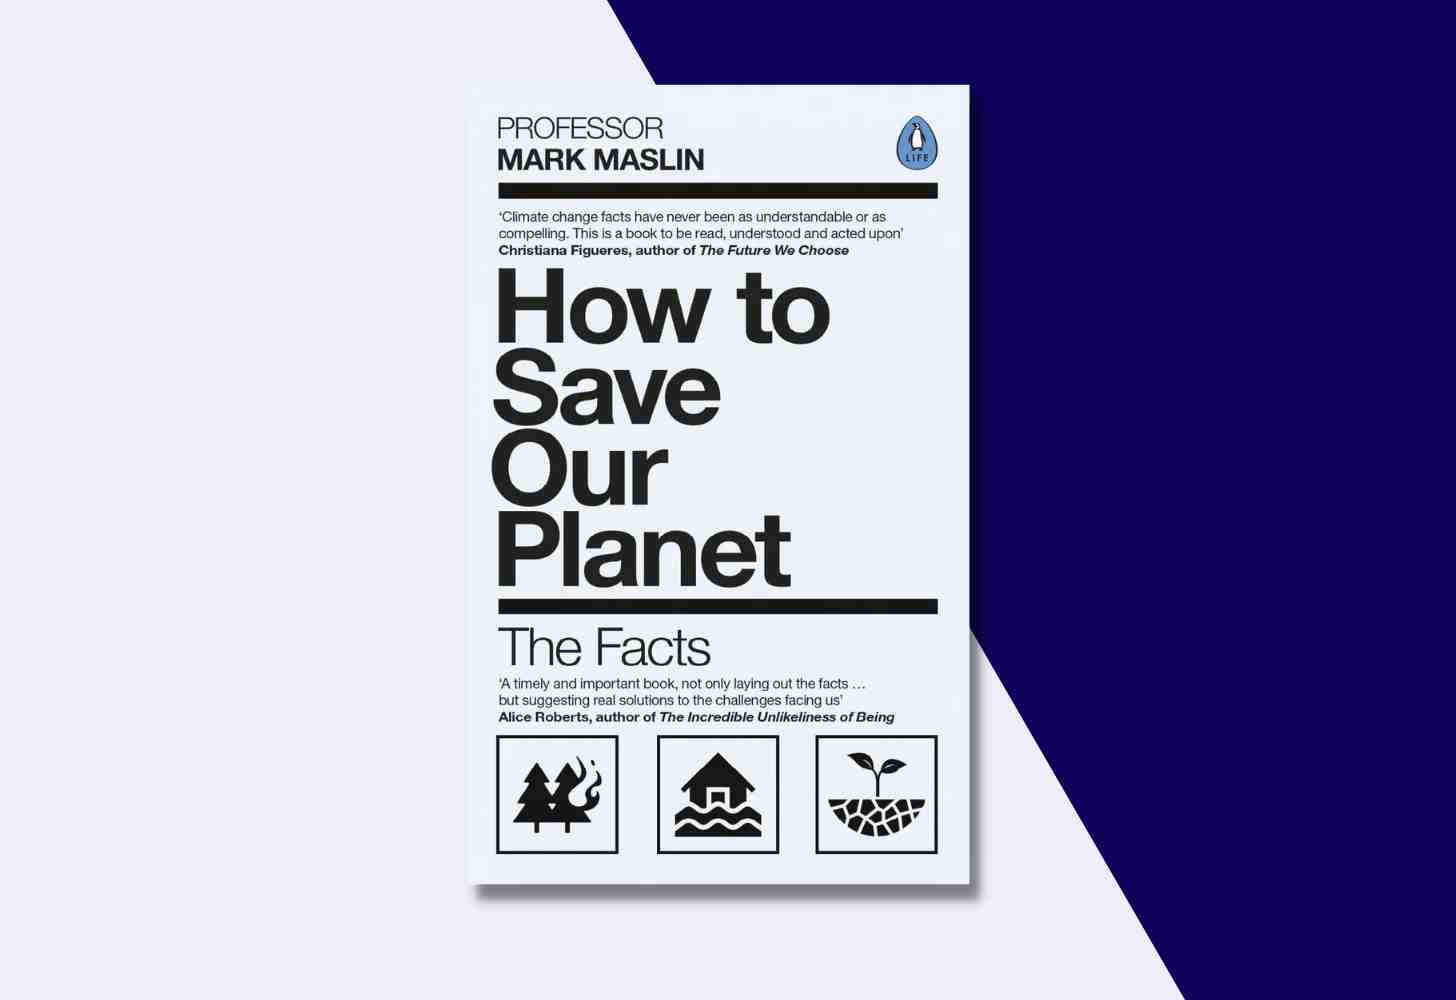 The Cover Of: “How To Save Our Planet: The Facts” by Mark Maslin